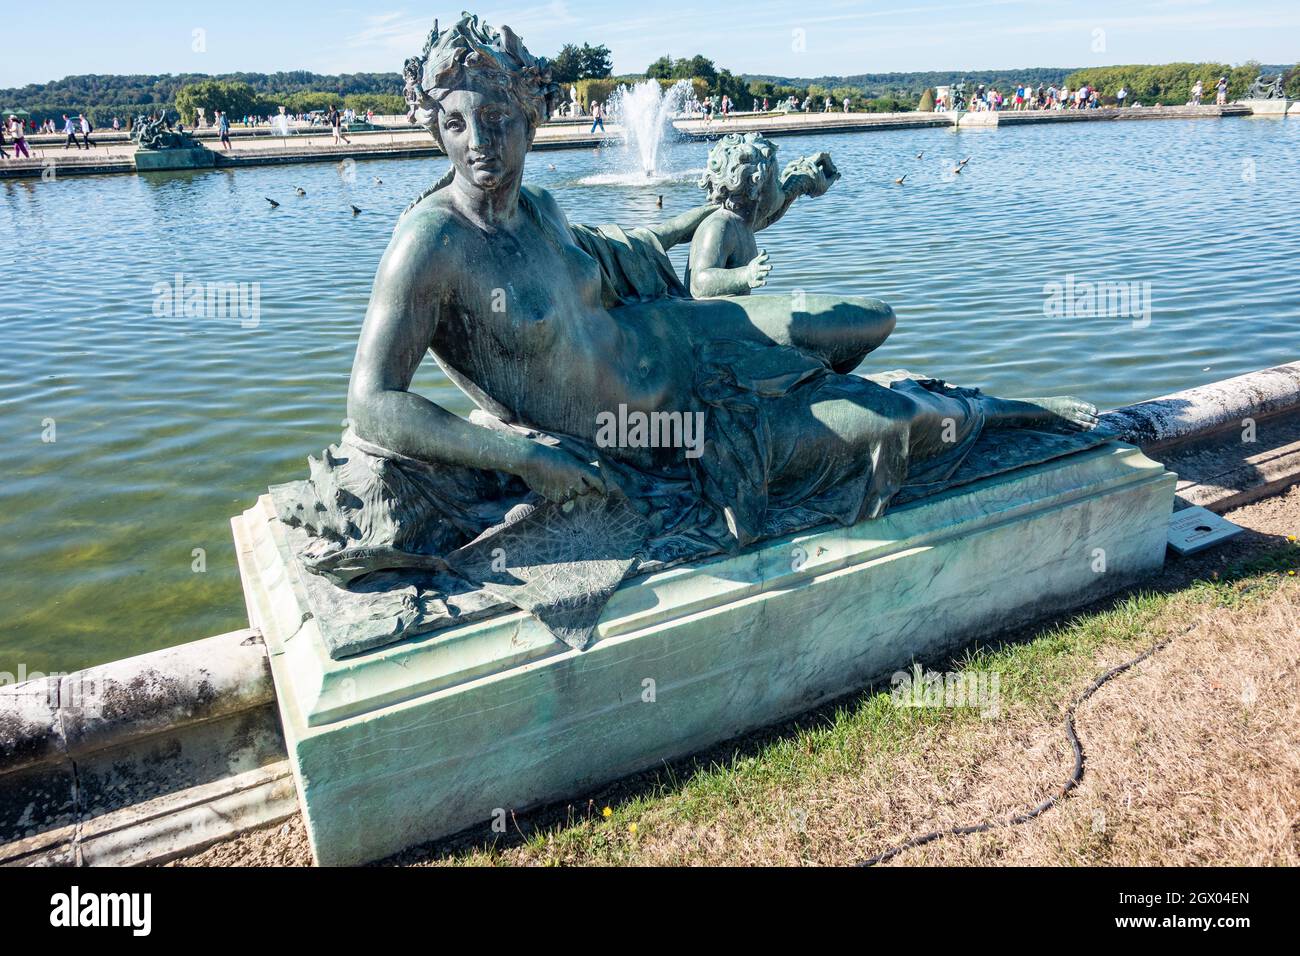 Bronze sculptures dot the landscape at the Gardens of Versailles in France Stock Photo